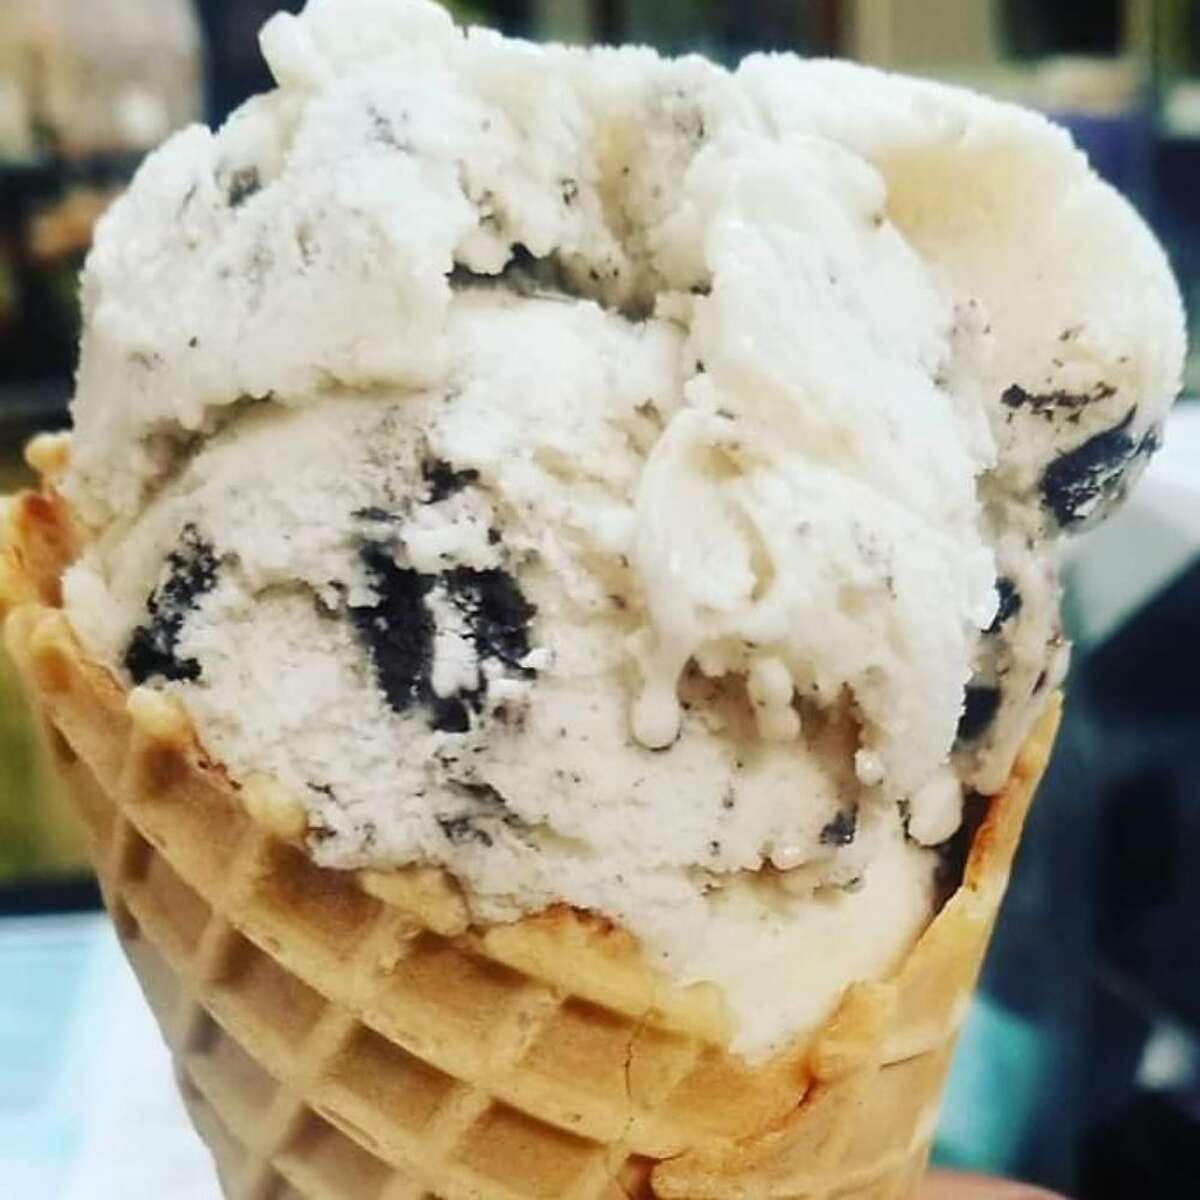 The vegan ice cream at Earthy Goodness looks like the real deal.